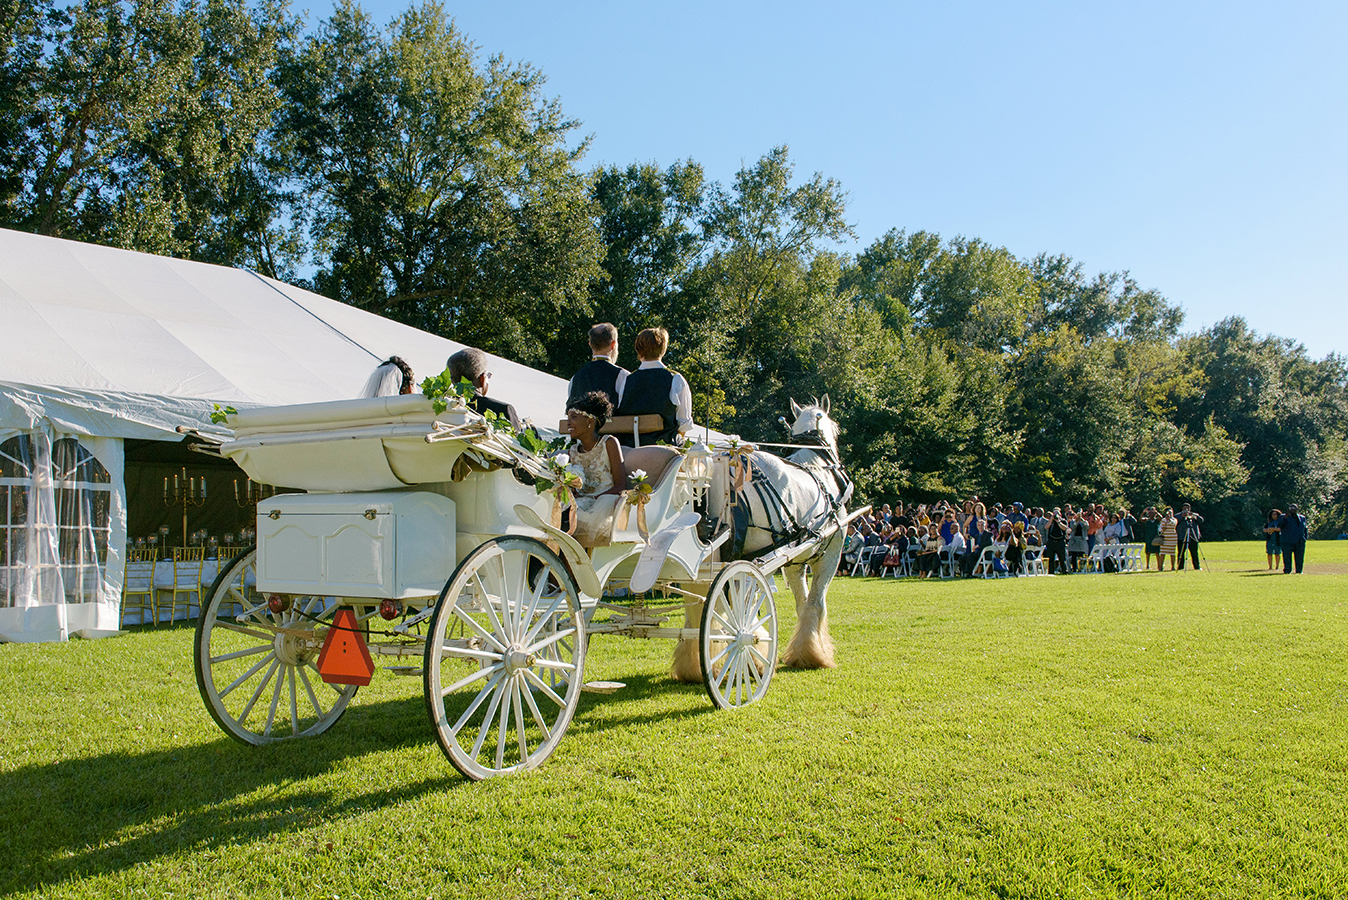 A horse drawn carriage carried Doliecha to the wedding ceremony.